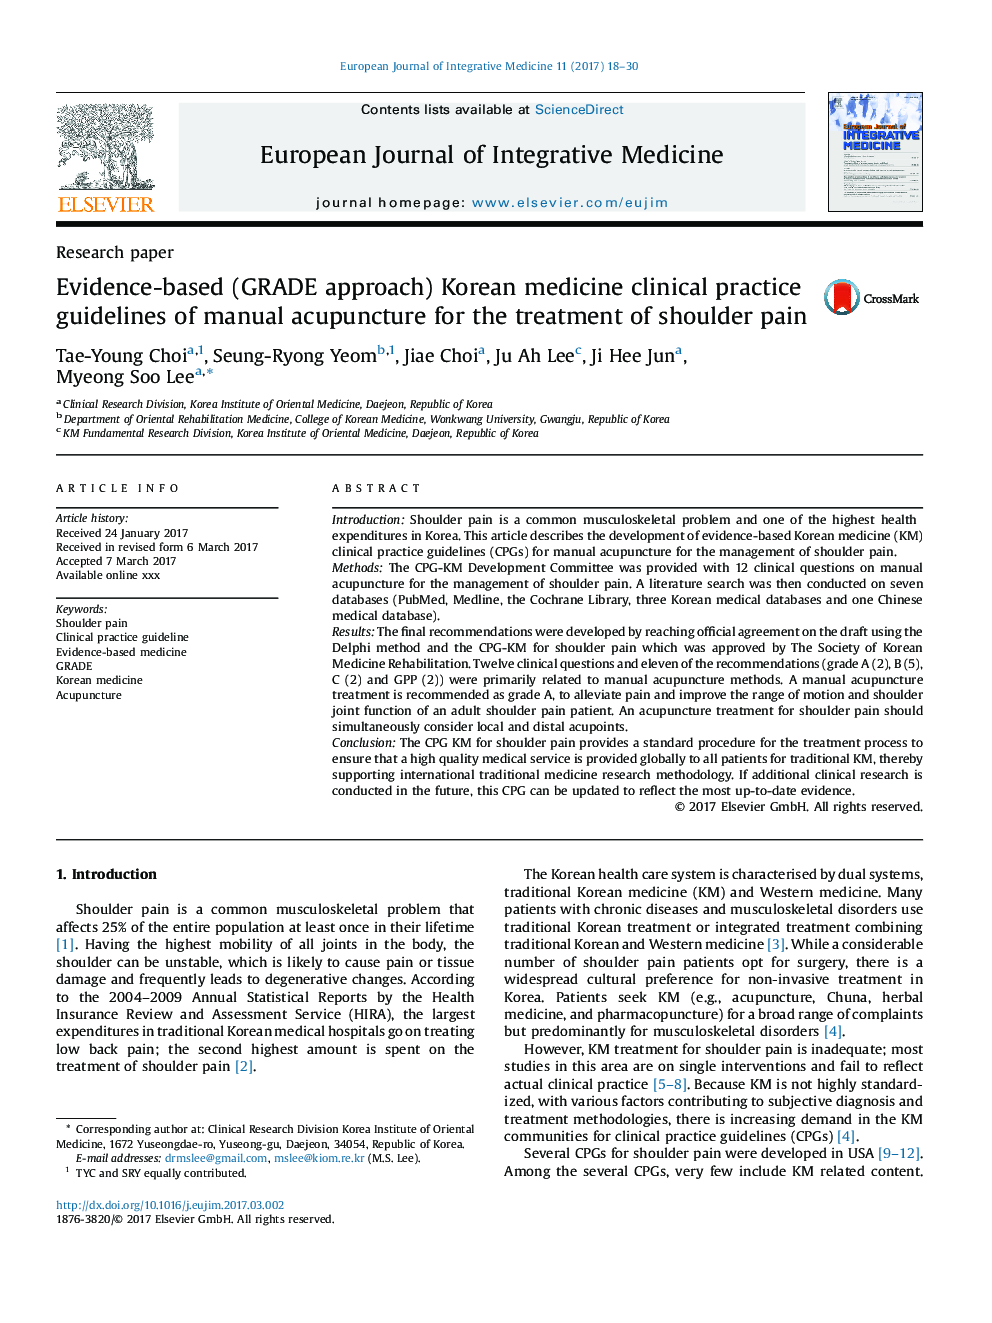 Research paperEvidence-based (GRADE approach) Korean medicine clinical practice guidelines of manual acupuncture for the treatment of shoulder pain